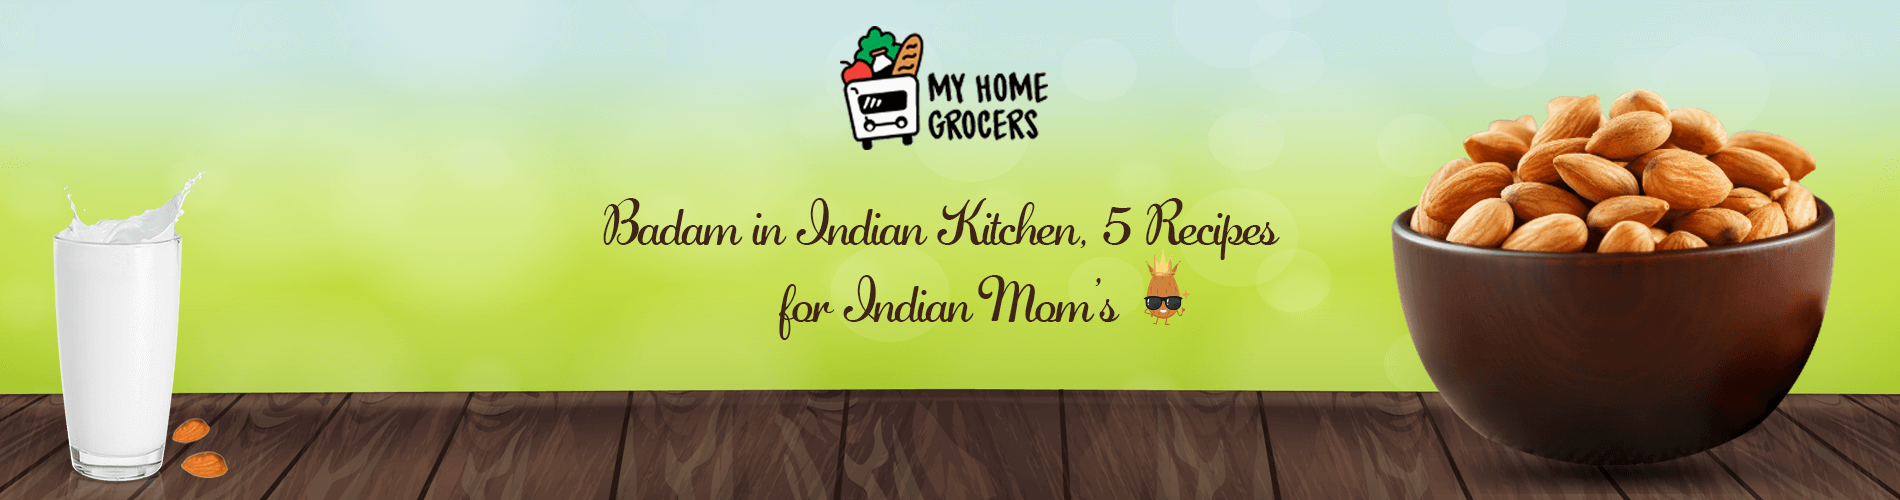 Badam in Indian Kitchen, 5 Recipes for Indian Mom’s